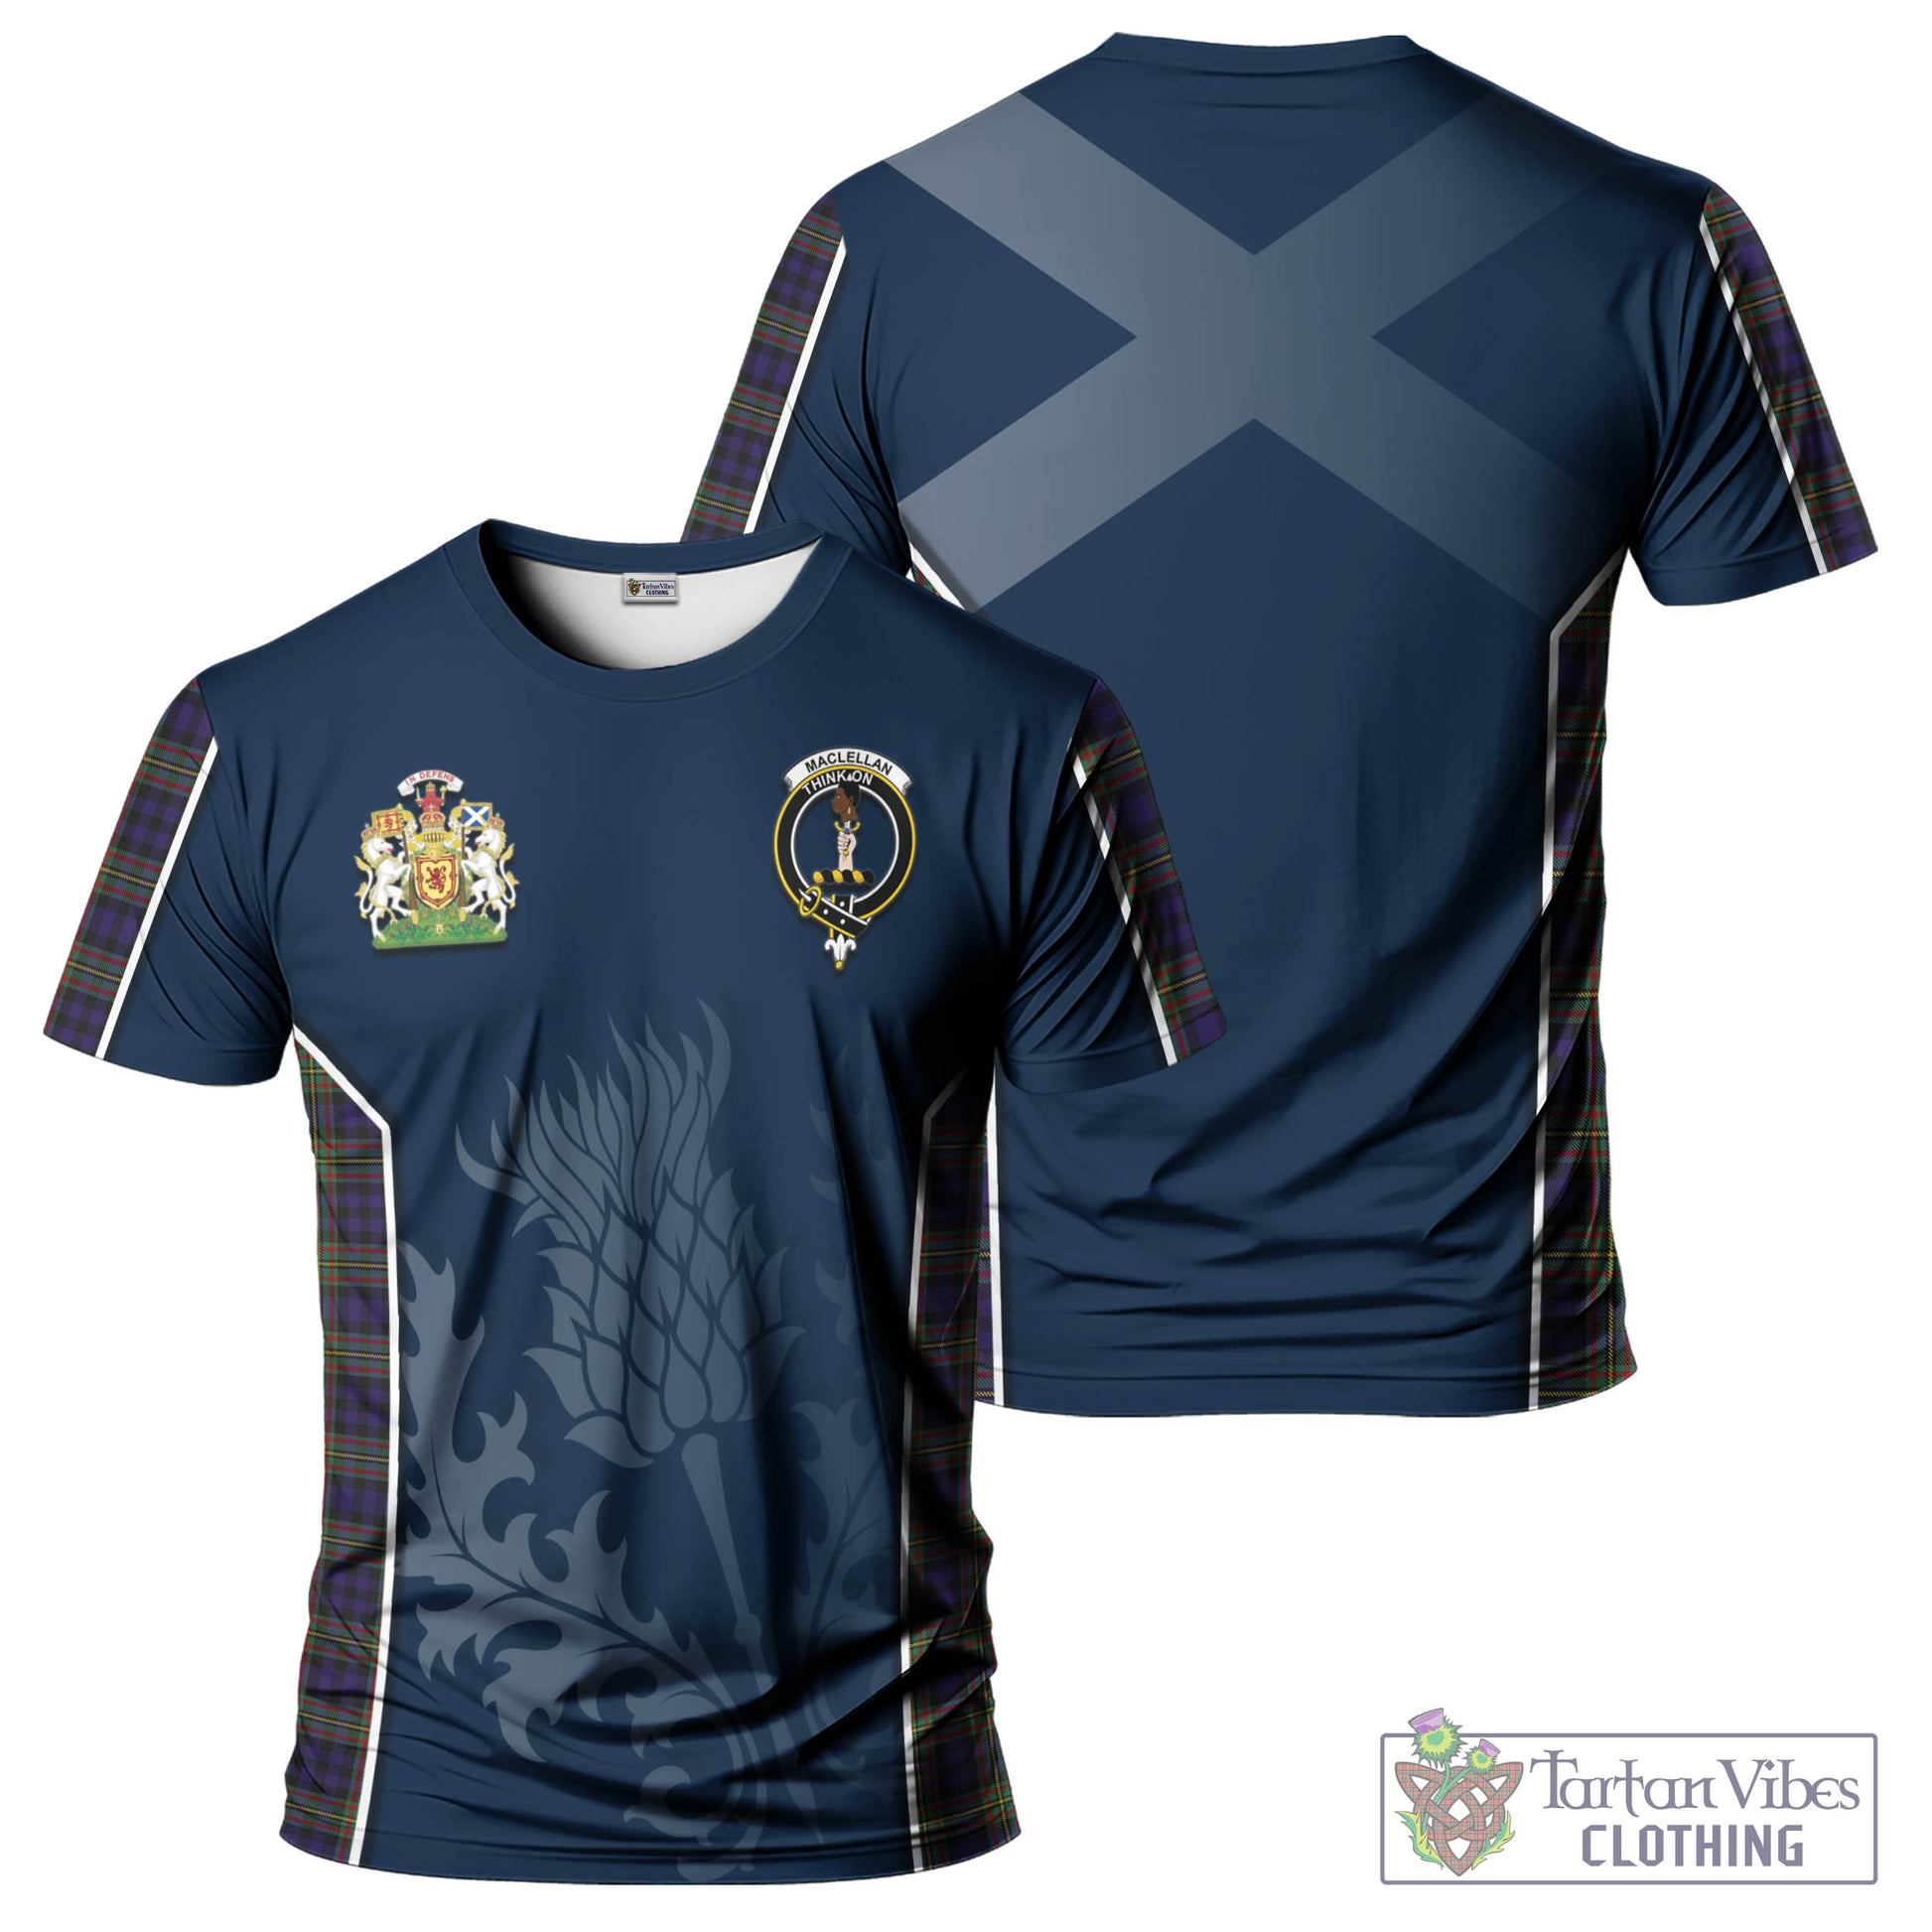 Tartan Vibes Clothing MacLellan Tartan T-Shirt with Family Crest and Scottish Thistle Vibes Sport Style